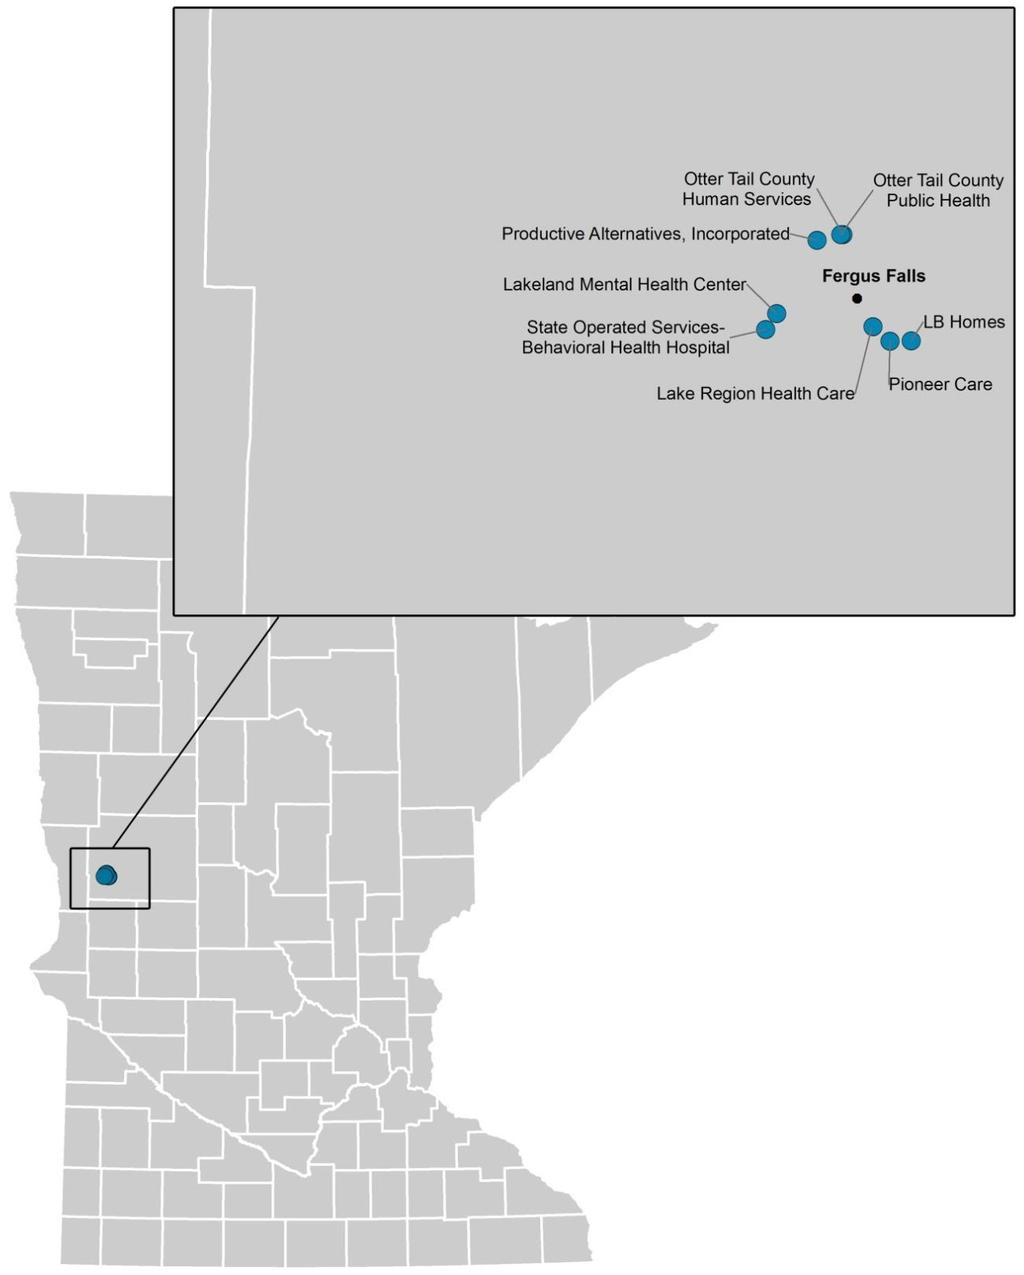 Implementation Grants 7. Fergus Falls Community of Practice Note: Plotted organizations may overlap because they are in close proximity.